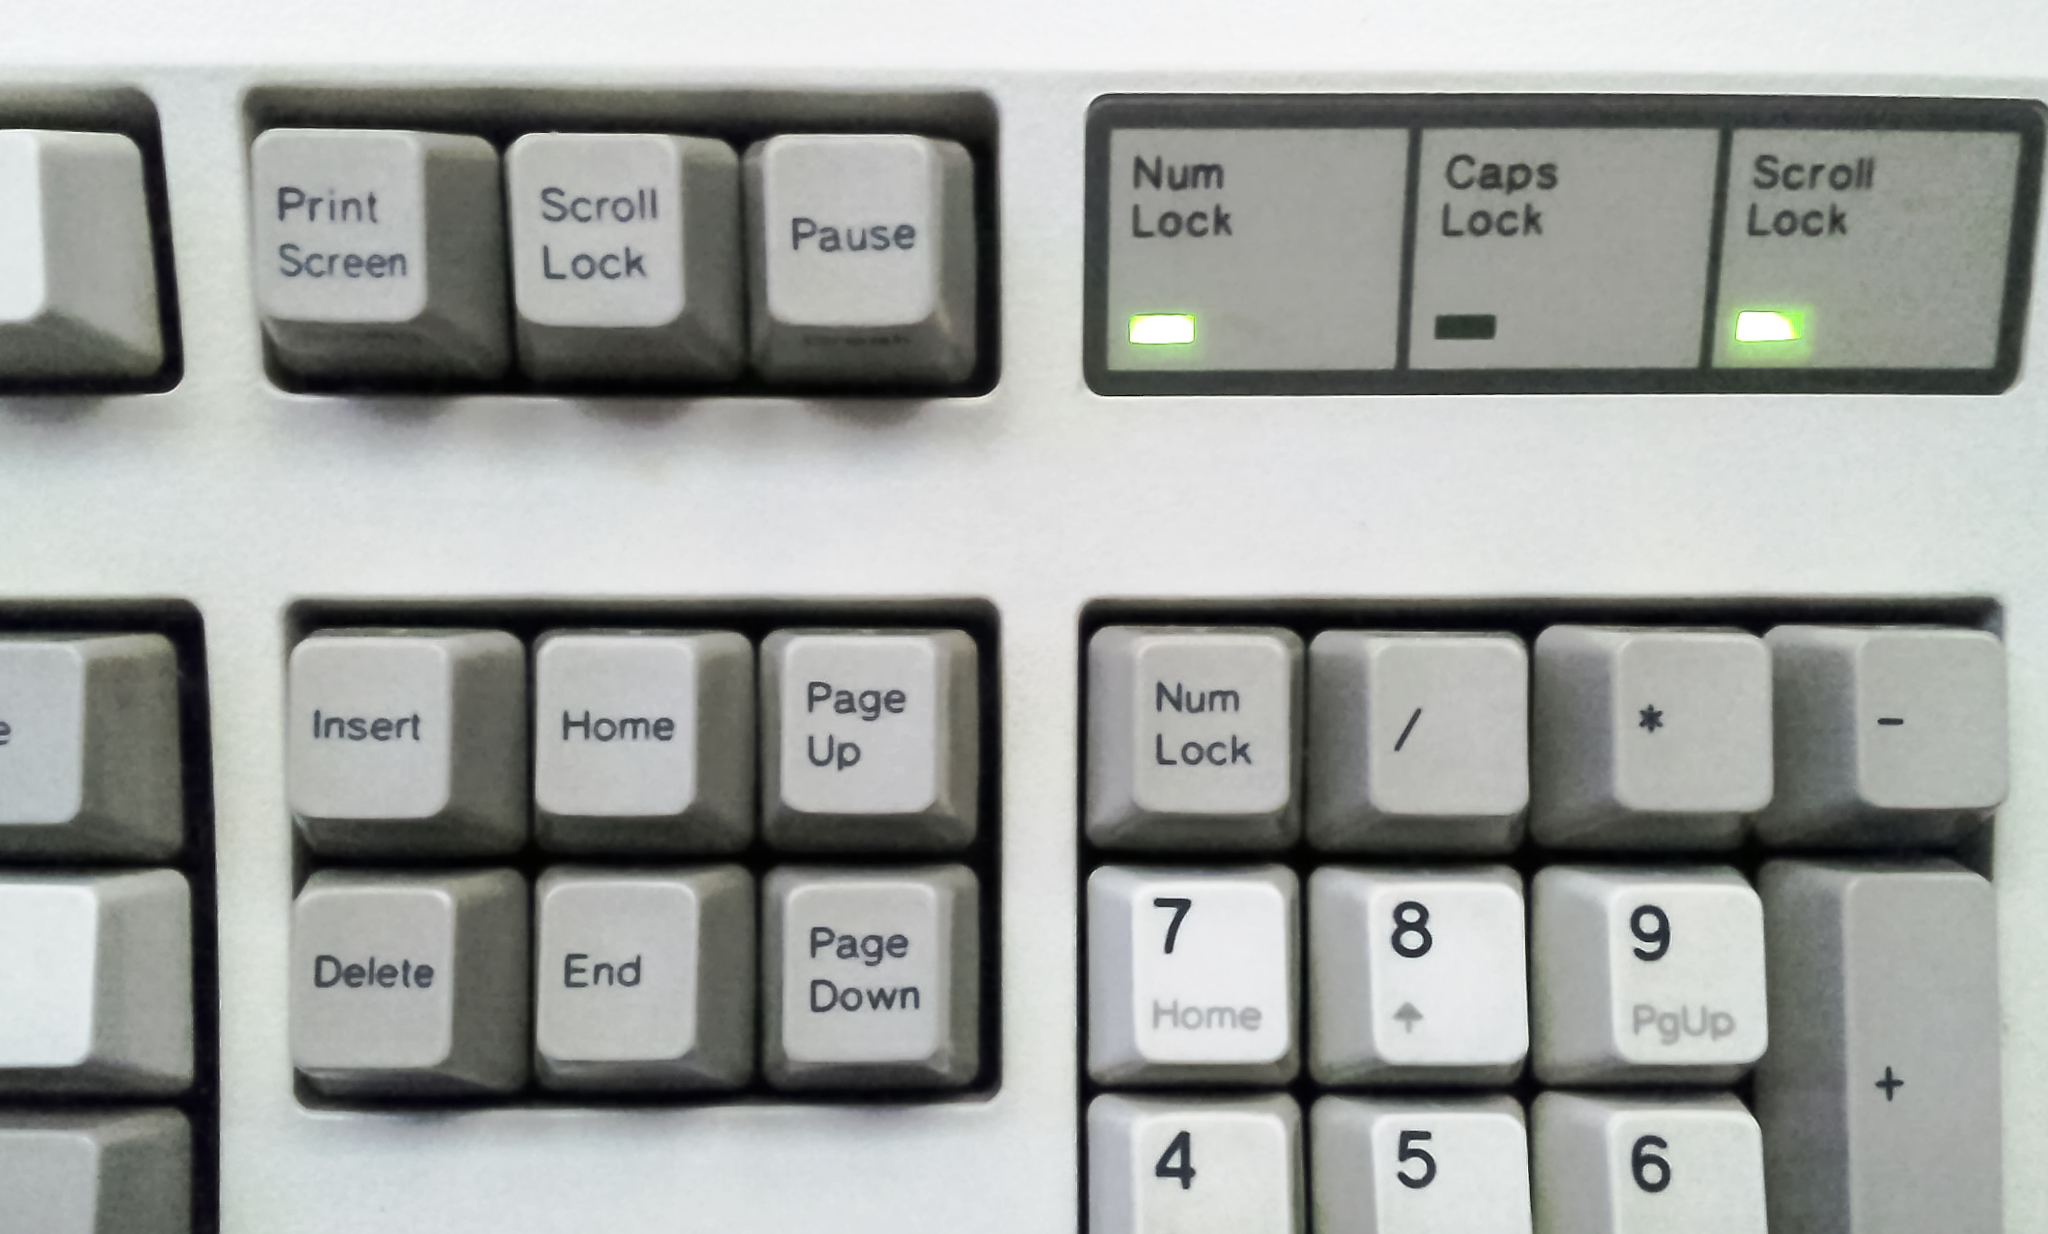 Keyboard with arrows pointing up and down